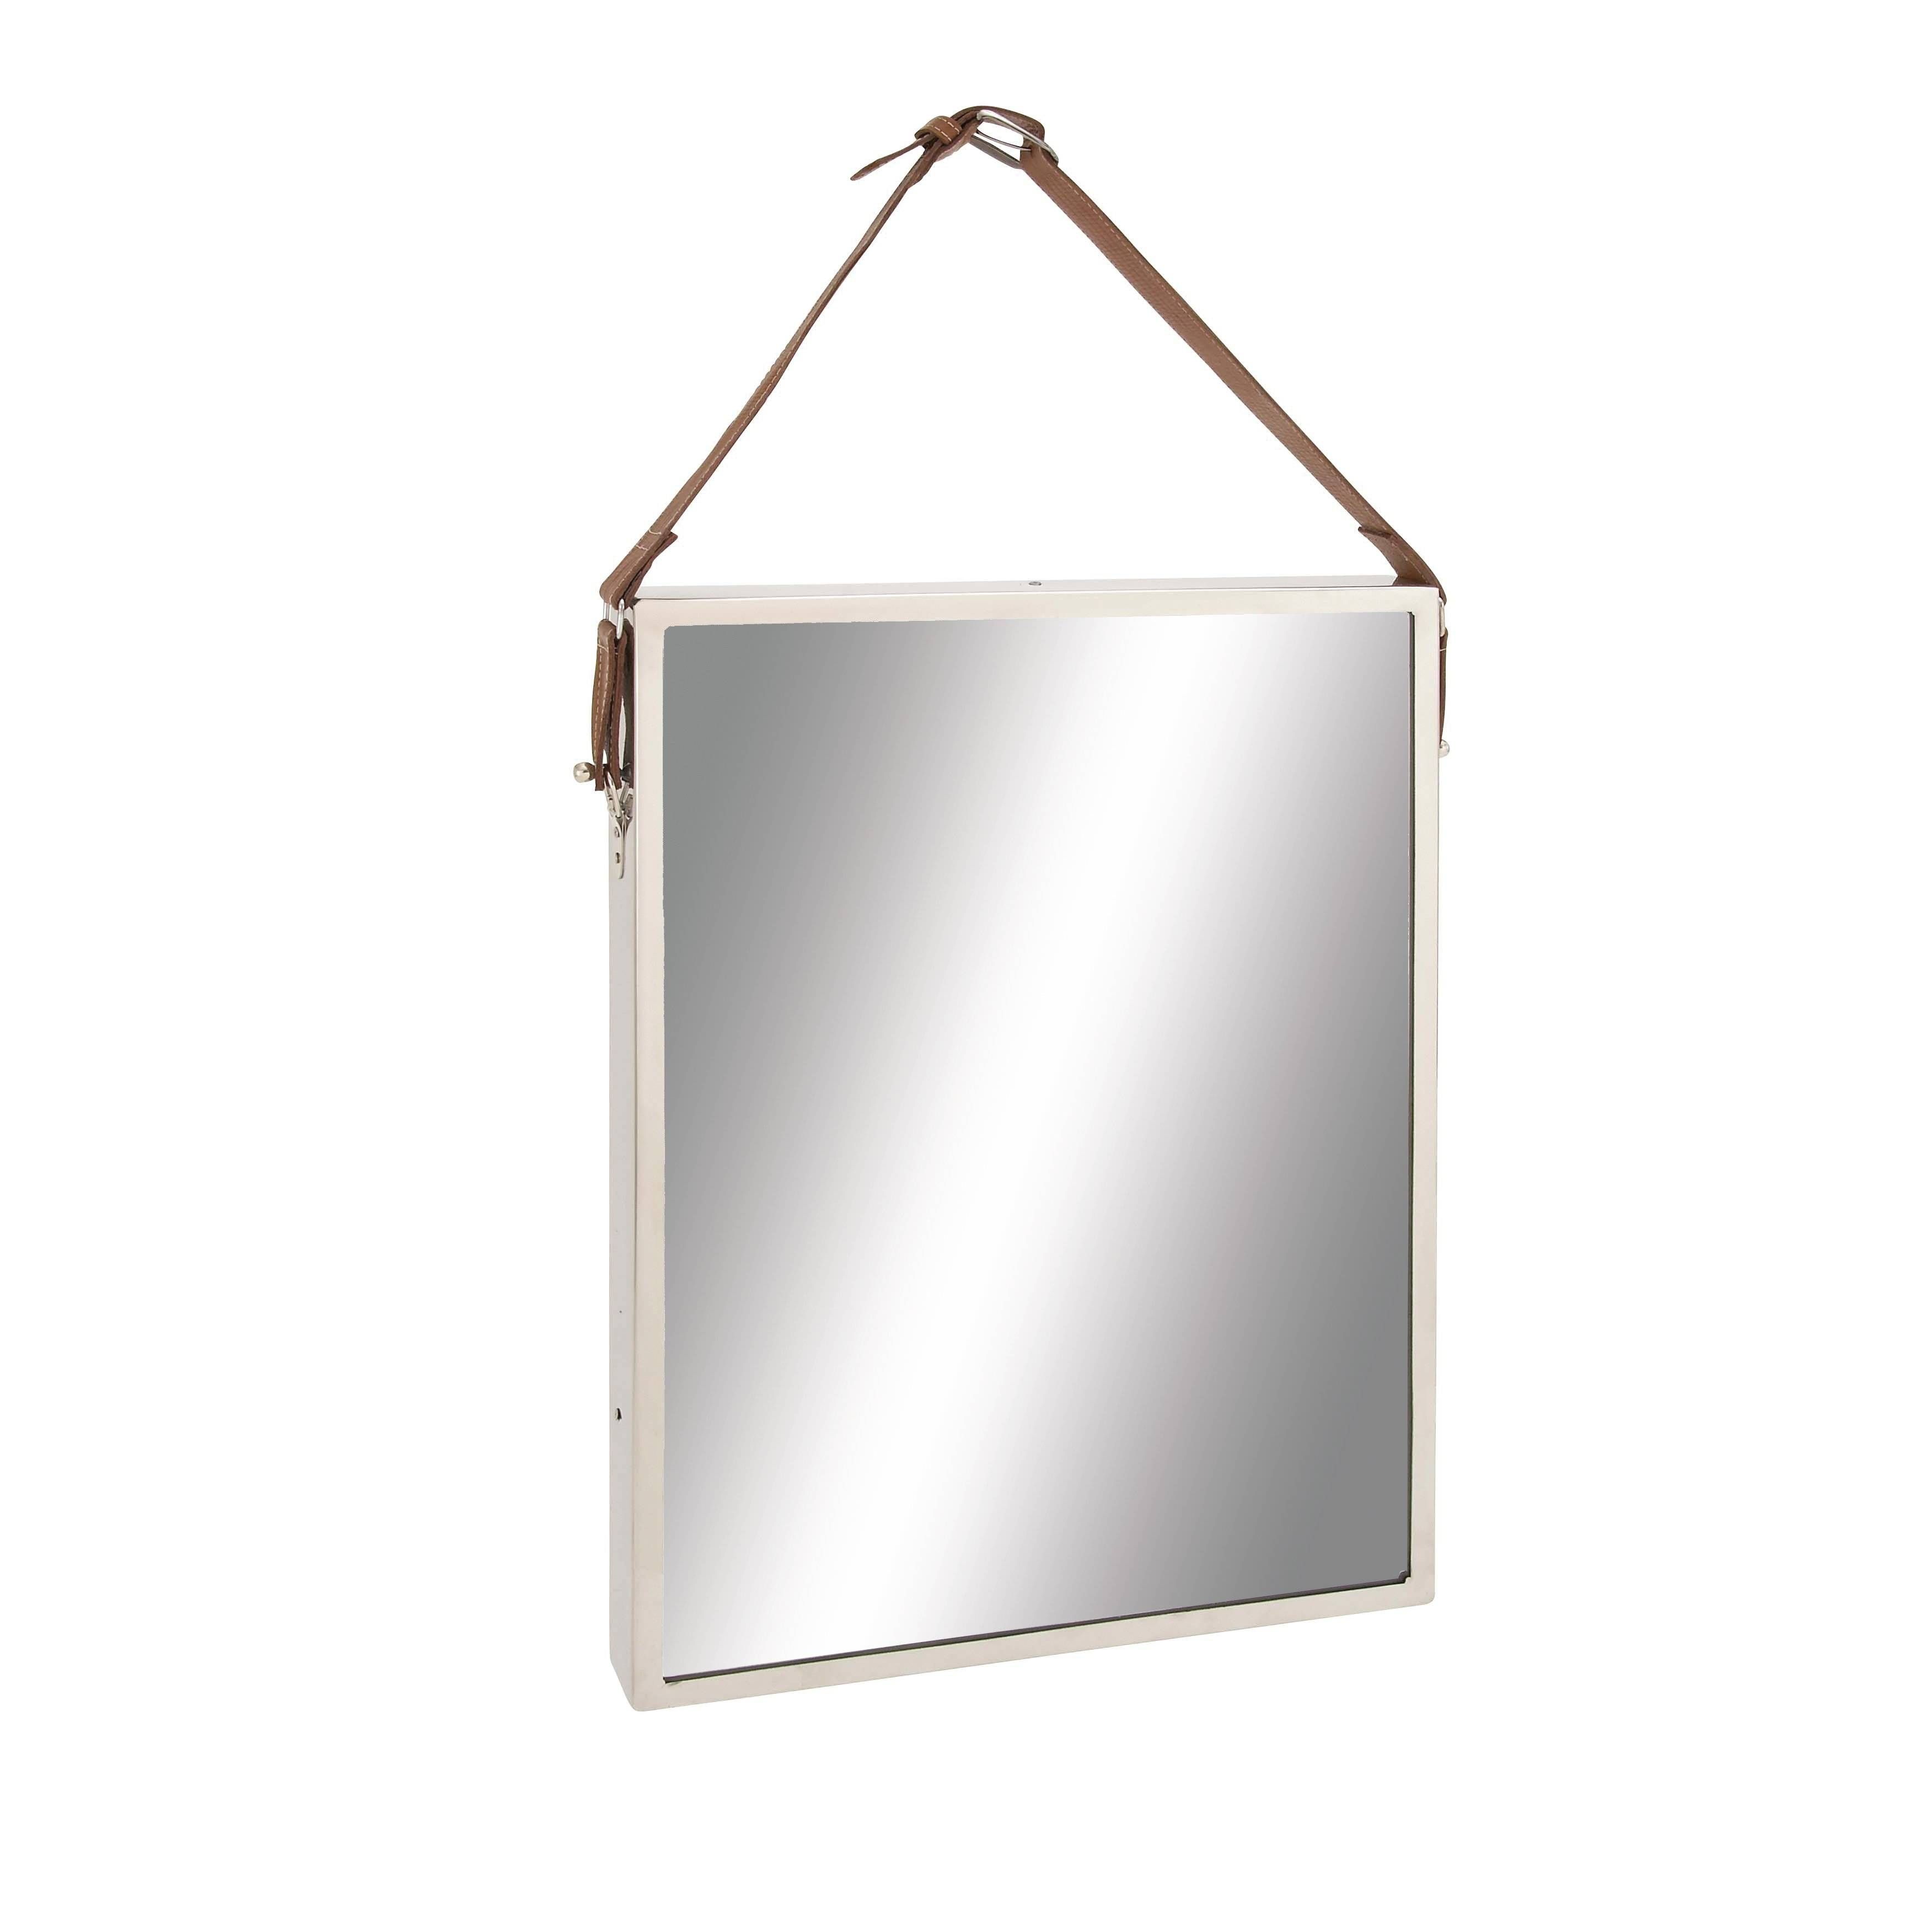 Woodland Imports The Slick Stainless Steel Leather Wall Mirror Pertaining To Leather Wall Mirrors (View 8 of 25)